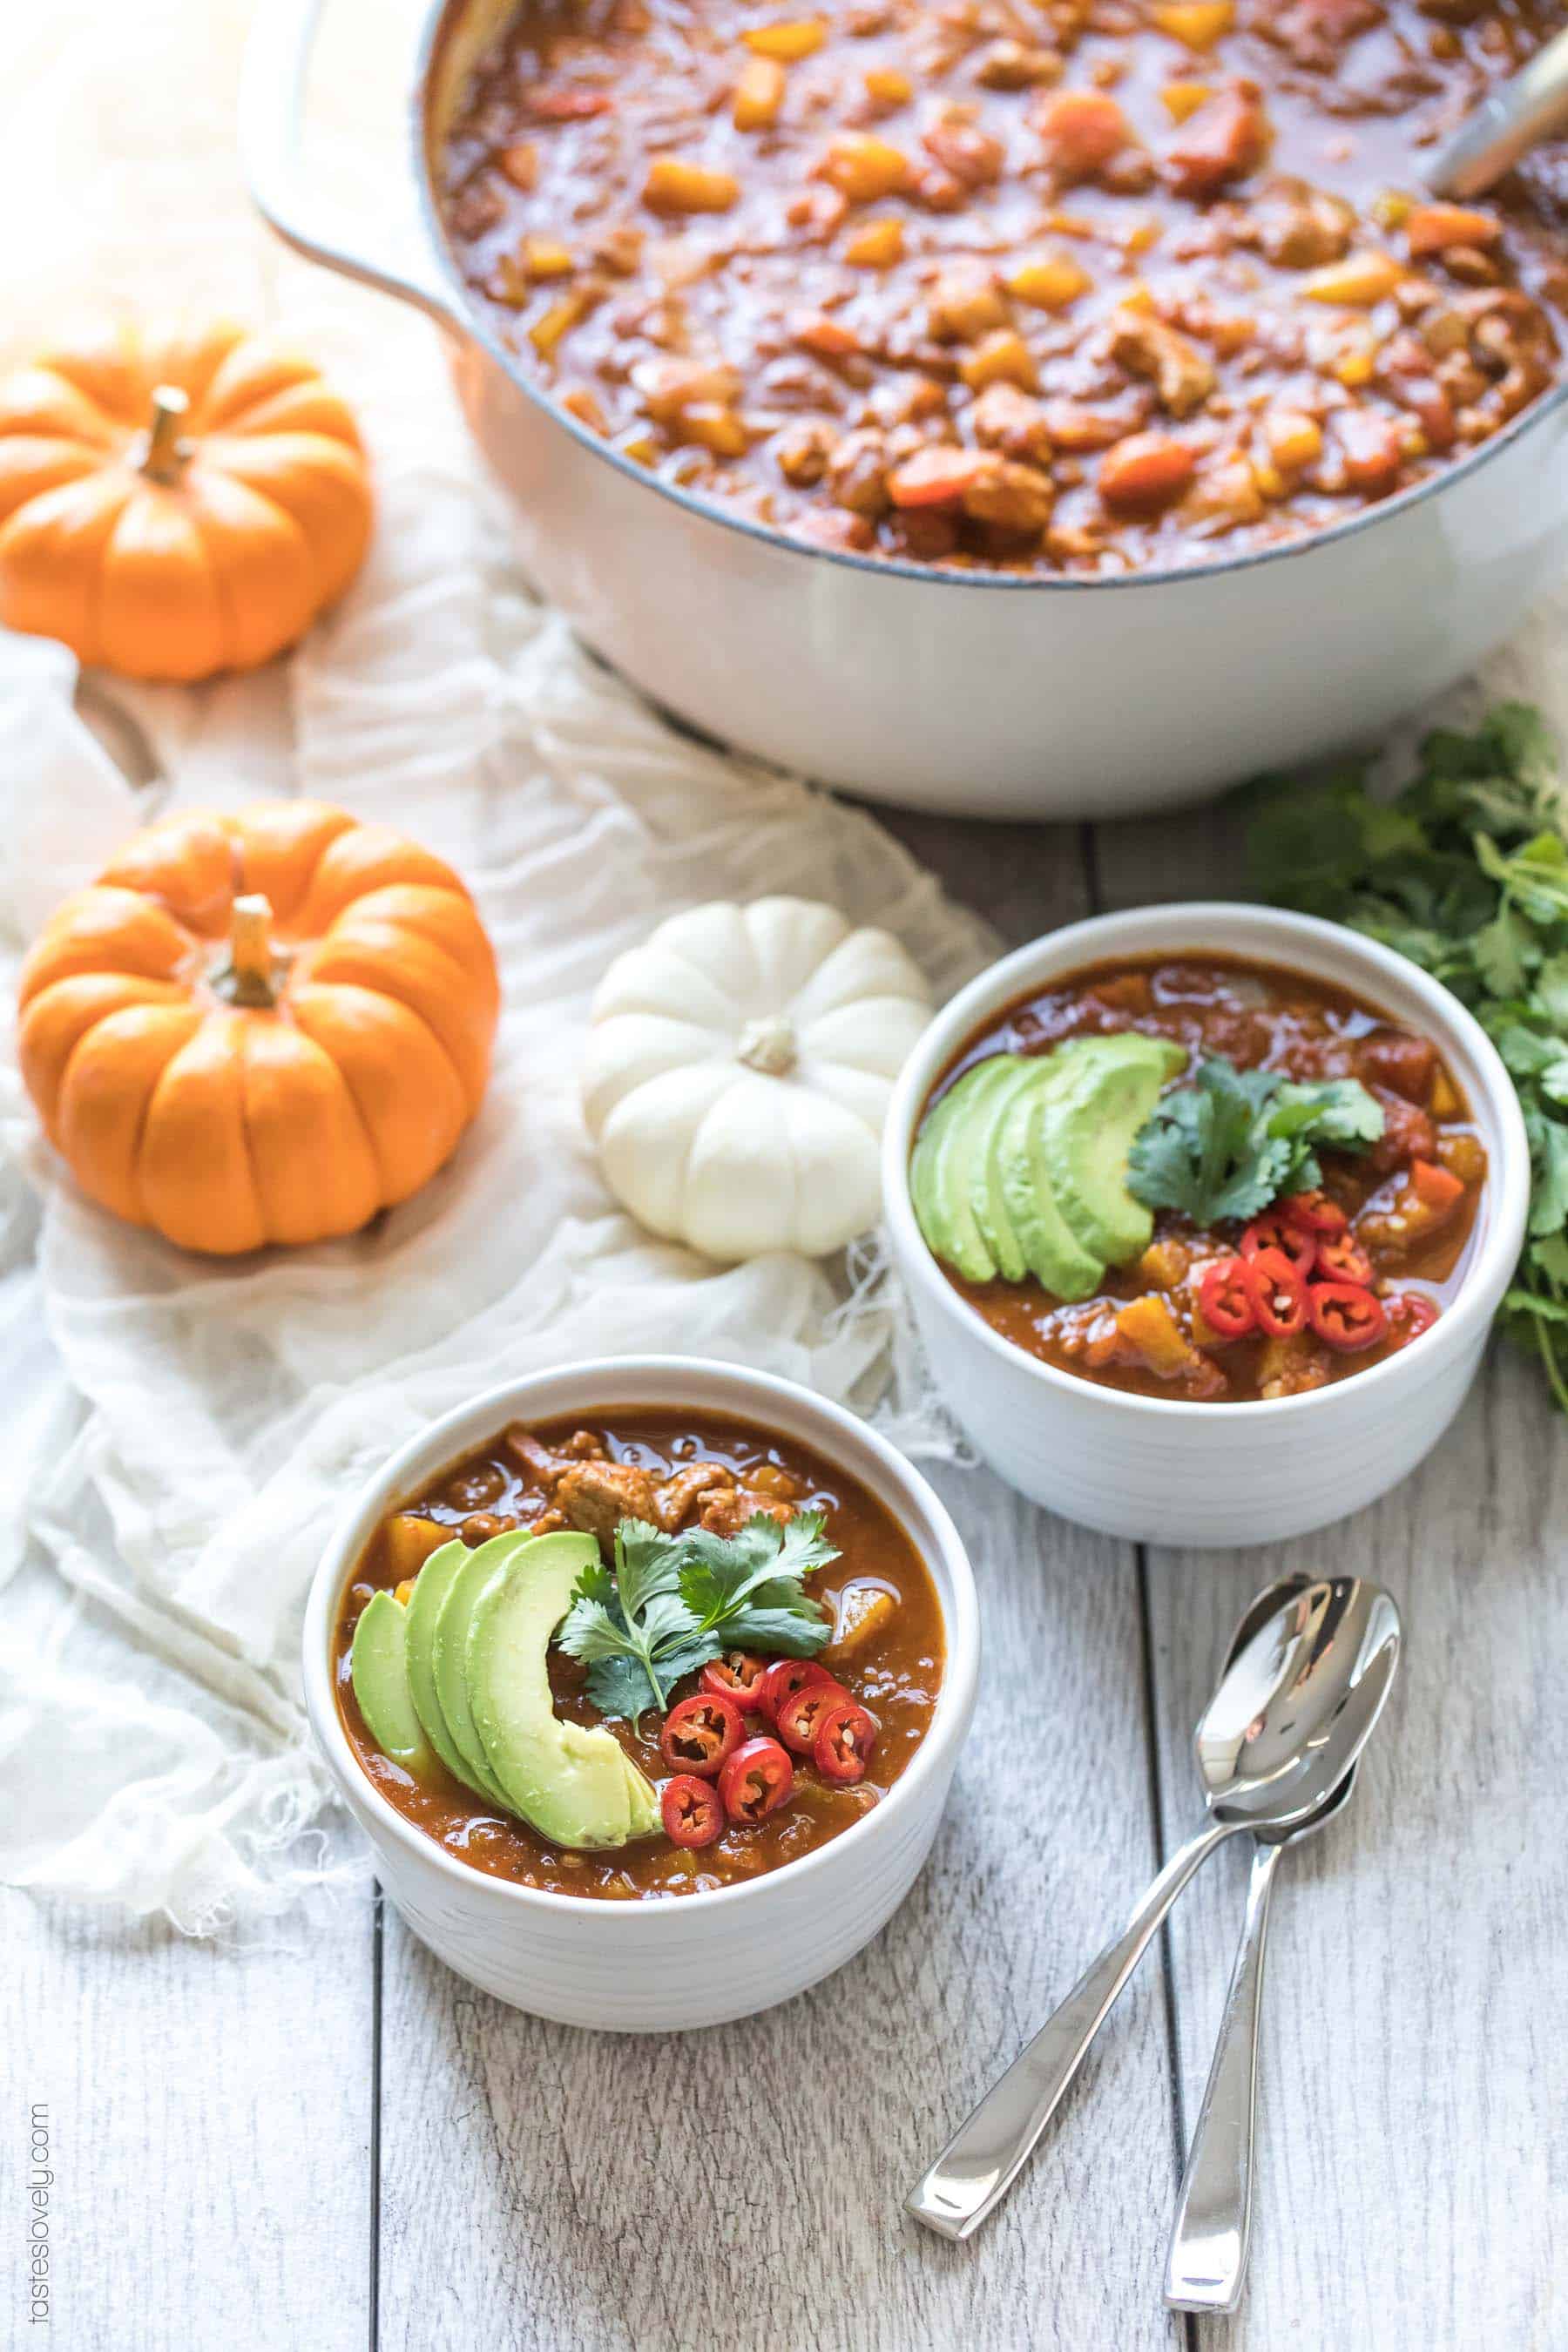 Paleo & Whole30 Pumpkin Turkey Chili Recipe - a no bean chili recipe you can make on the stovetop or in your slow cooker! Dairy free, gluten free, sugar free, clean eating.